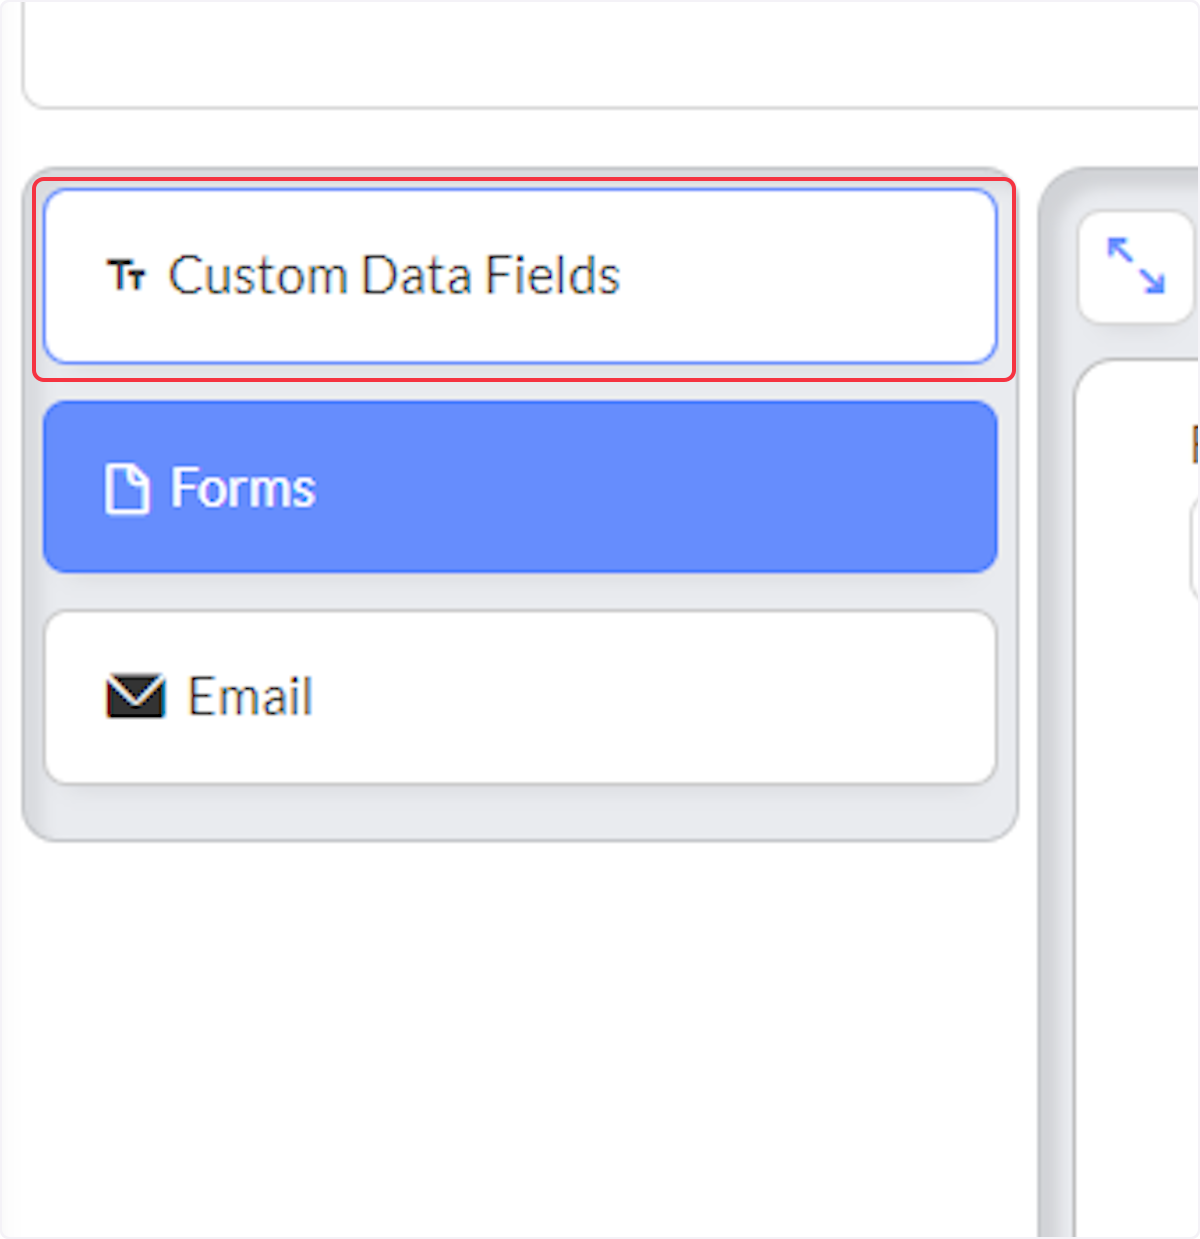 When creating or editing a Permit Type, click on Custom Data Fields.